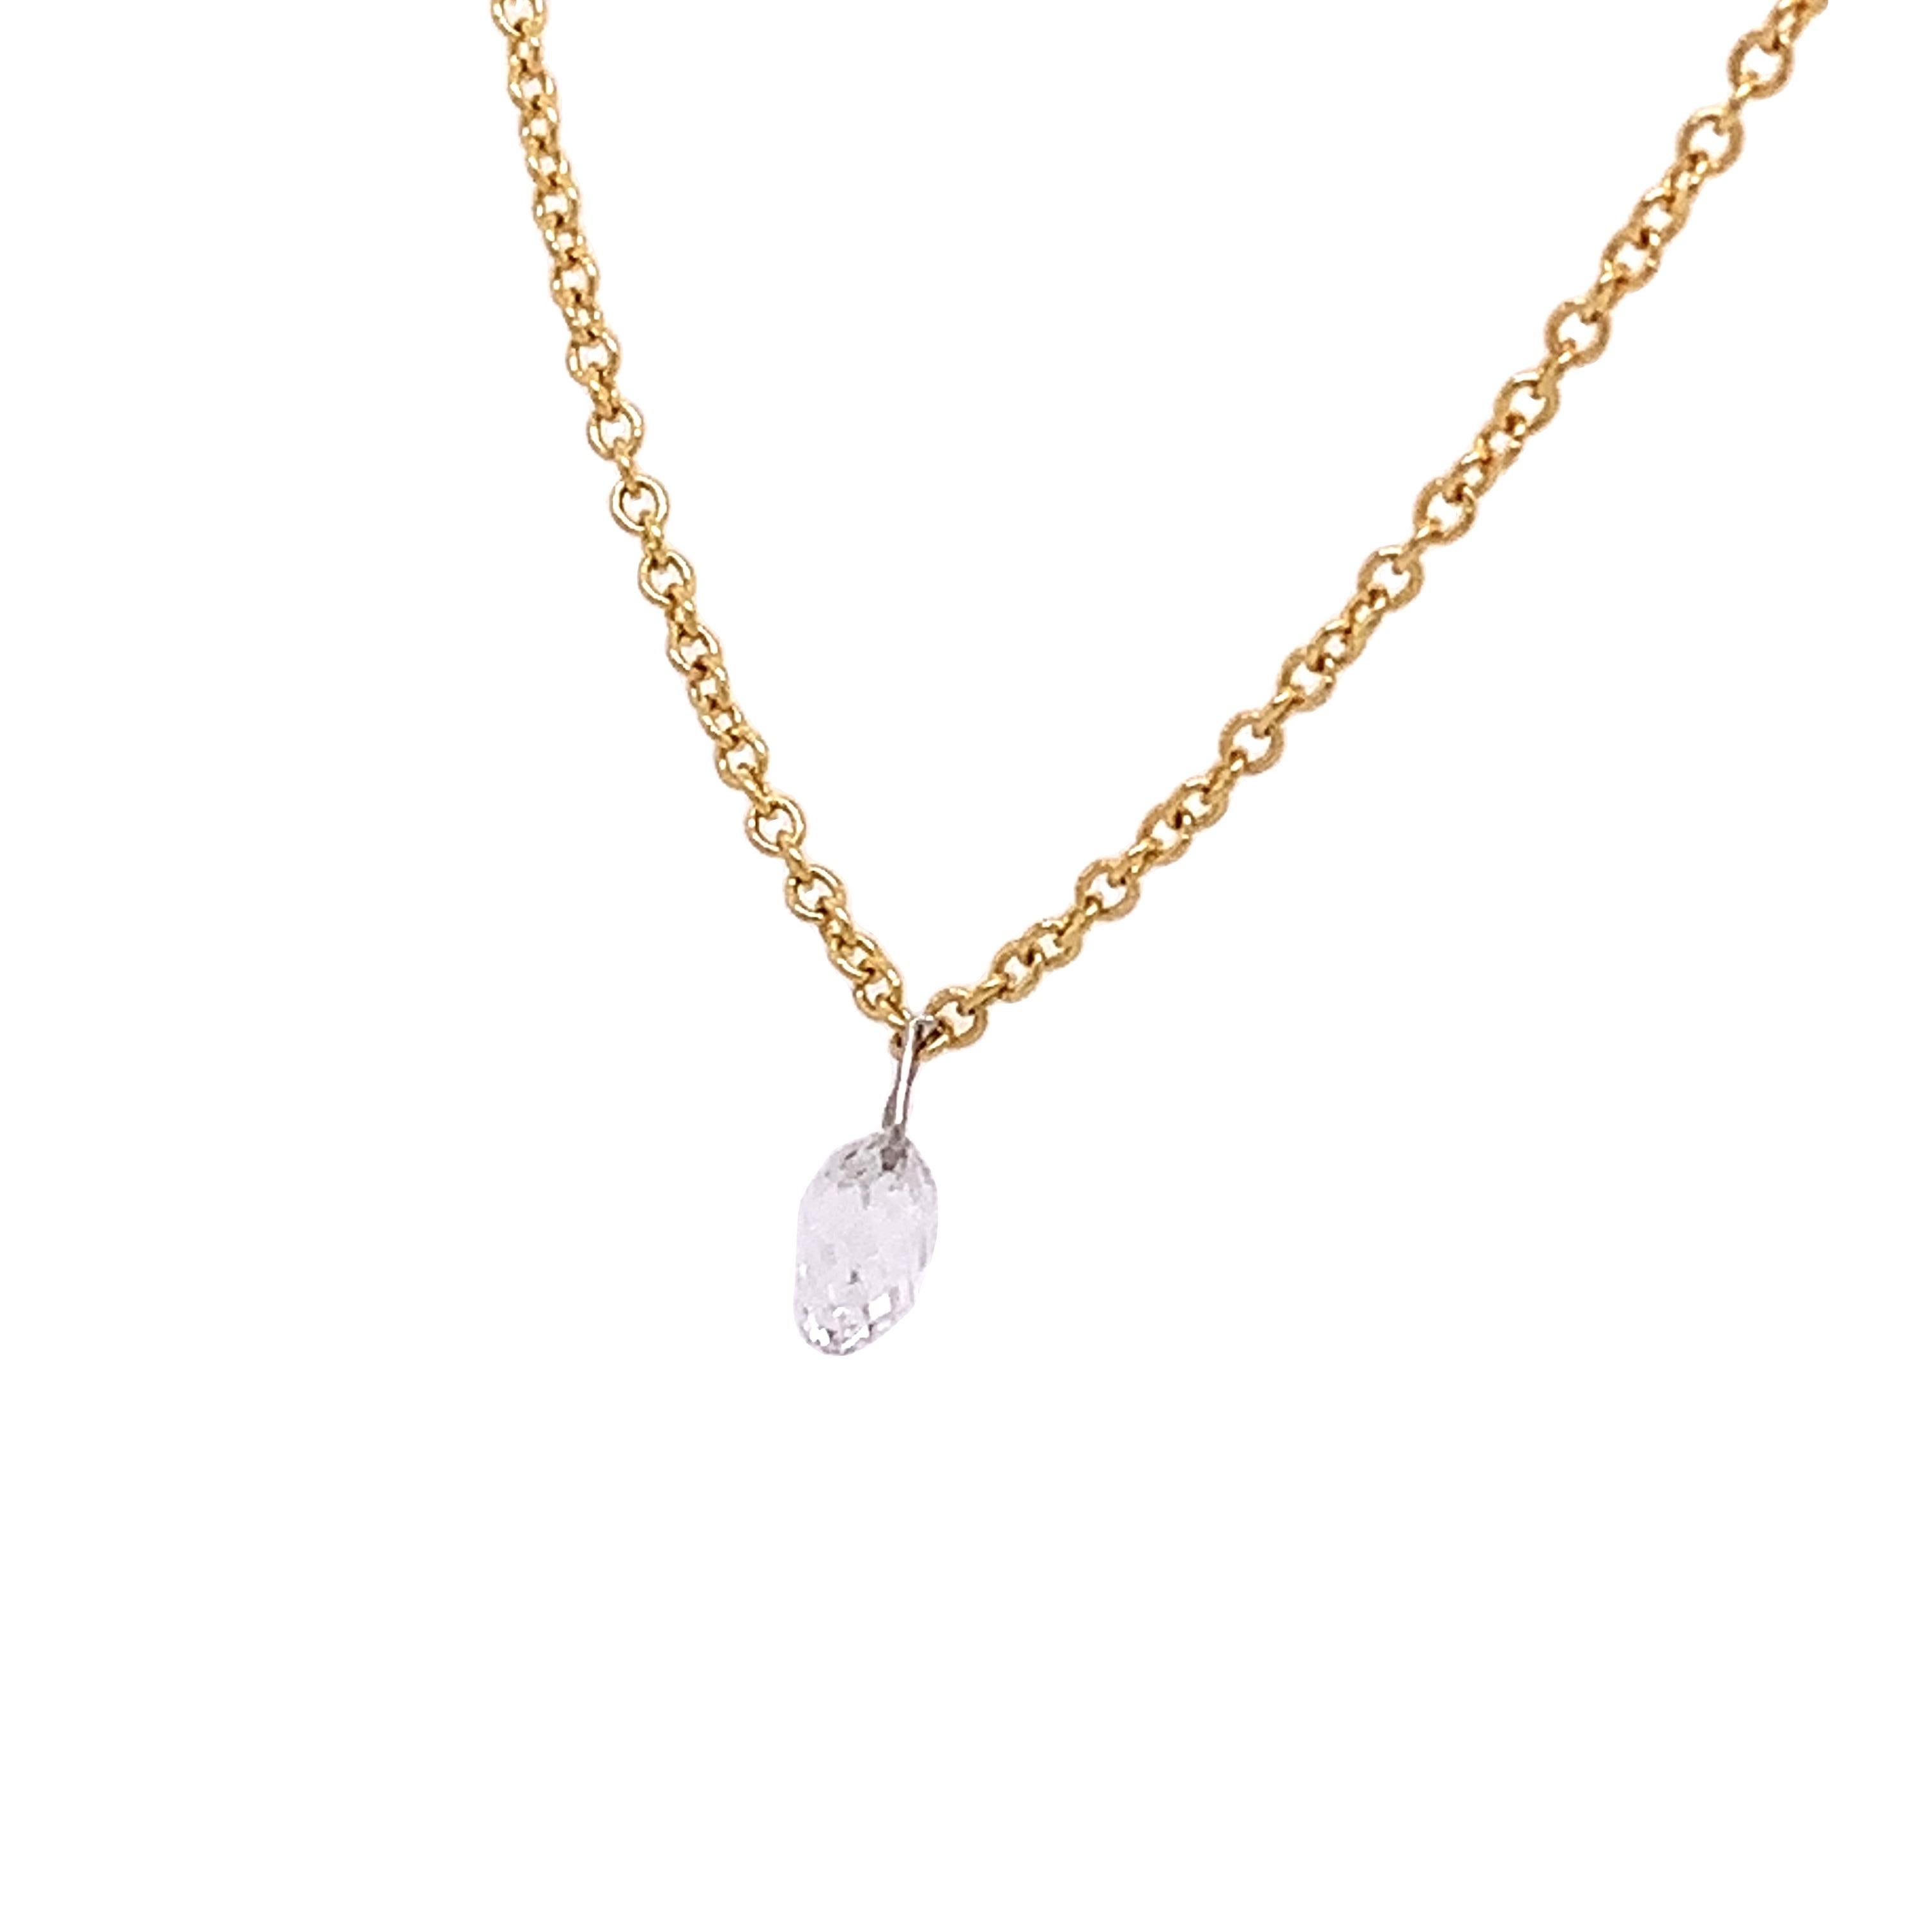 Dainty Collection

The everyday refinement of Yellow Gold gently sparkles with a tiny fringe of totaling 0.24 carat a briolette-cut Diamond in this magnificent necklace.